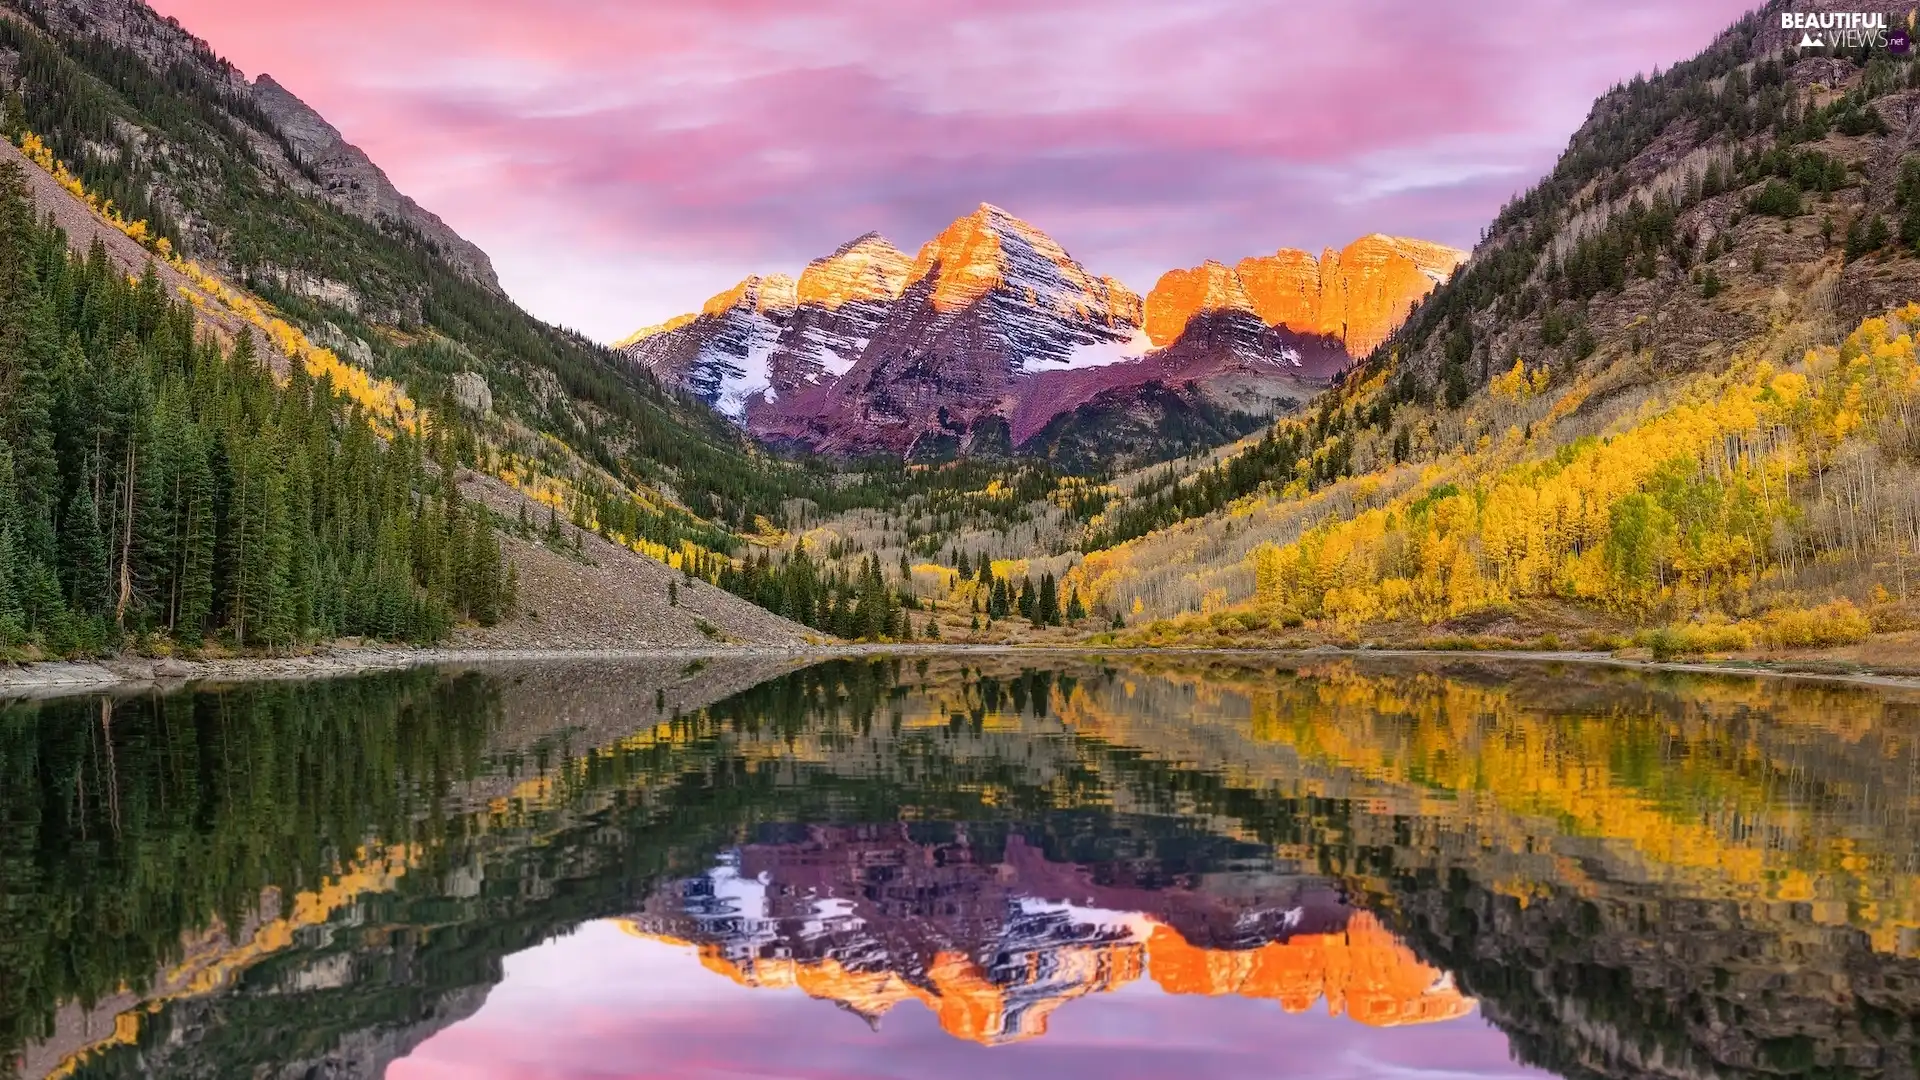 Maroon Bells Peaks, rocky mountains, Maroon Lake, reflection, Colorado, The United States, viewes, autumn, trees